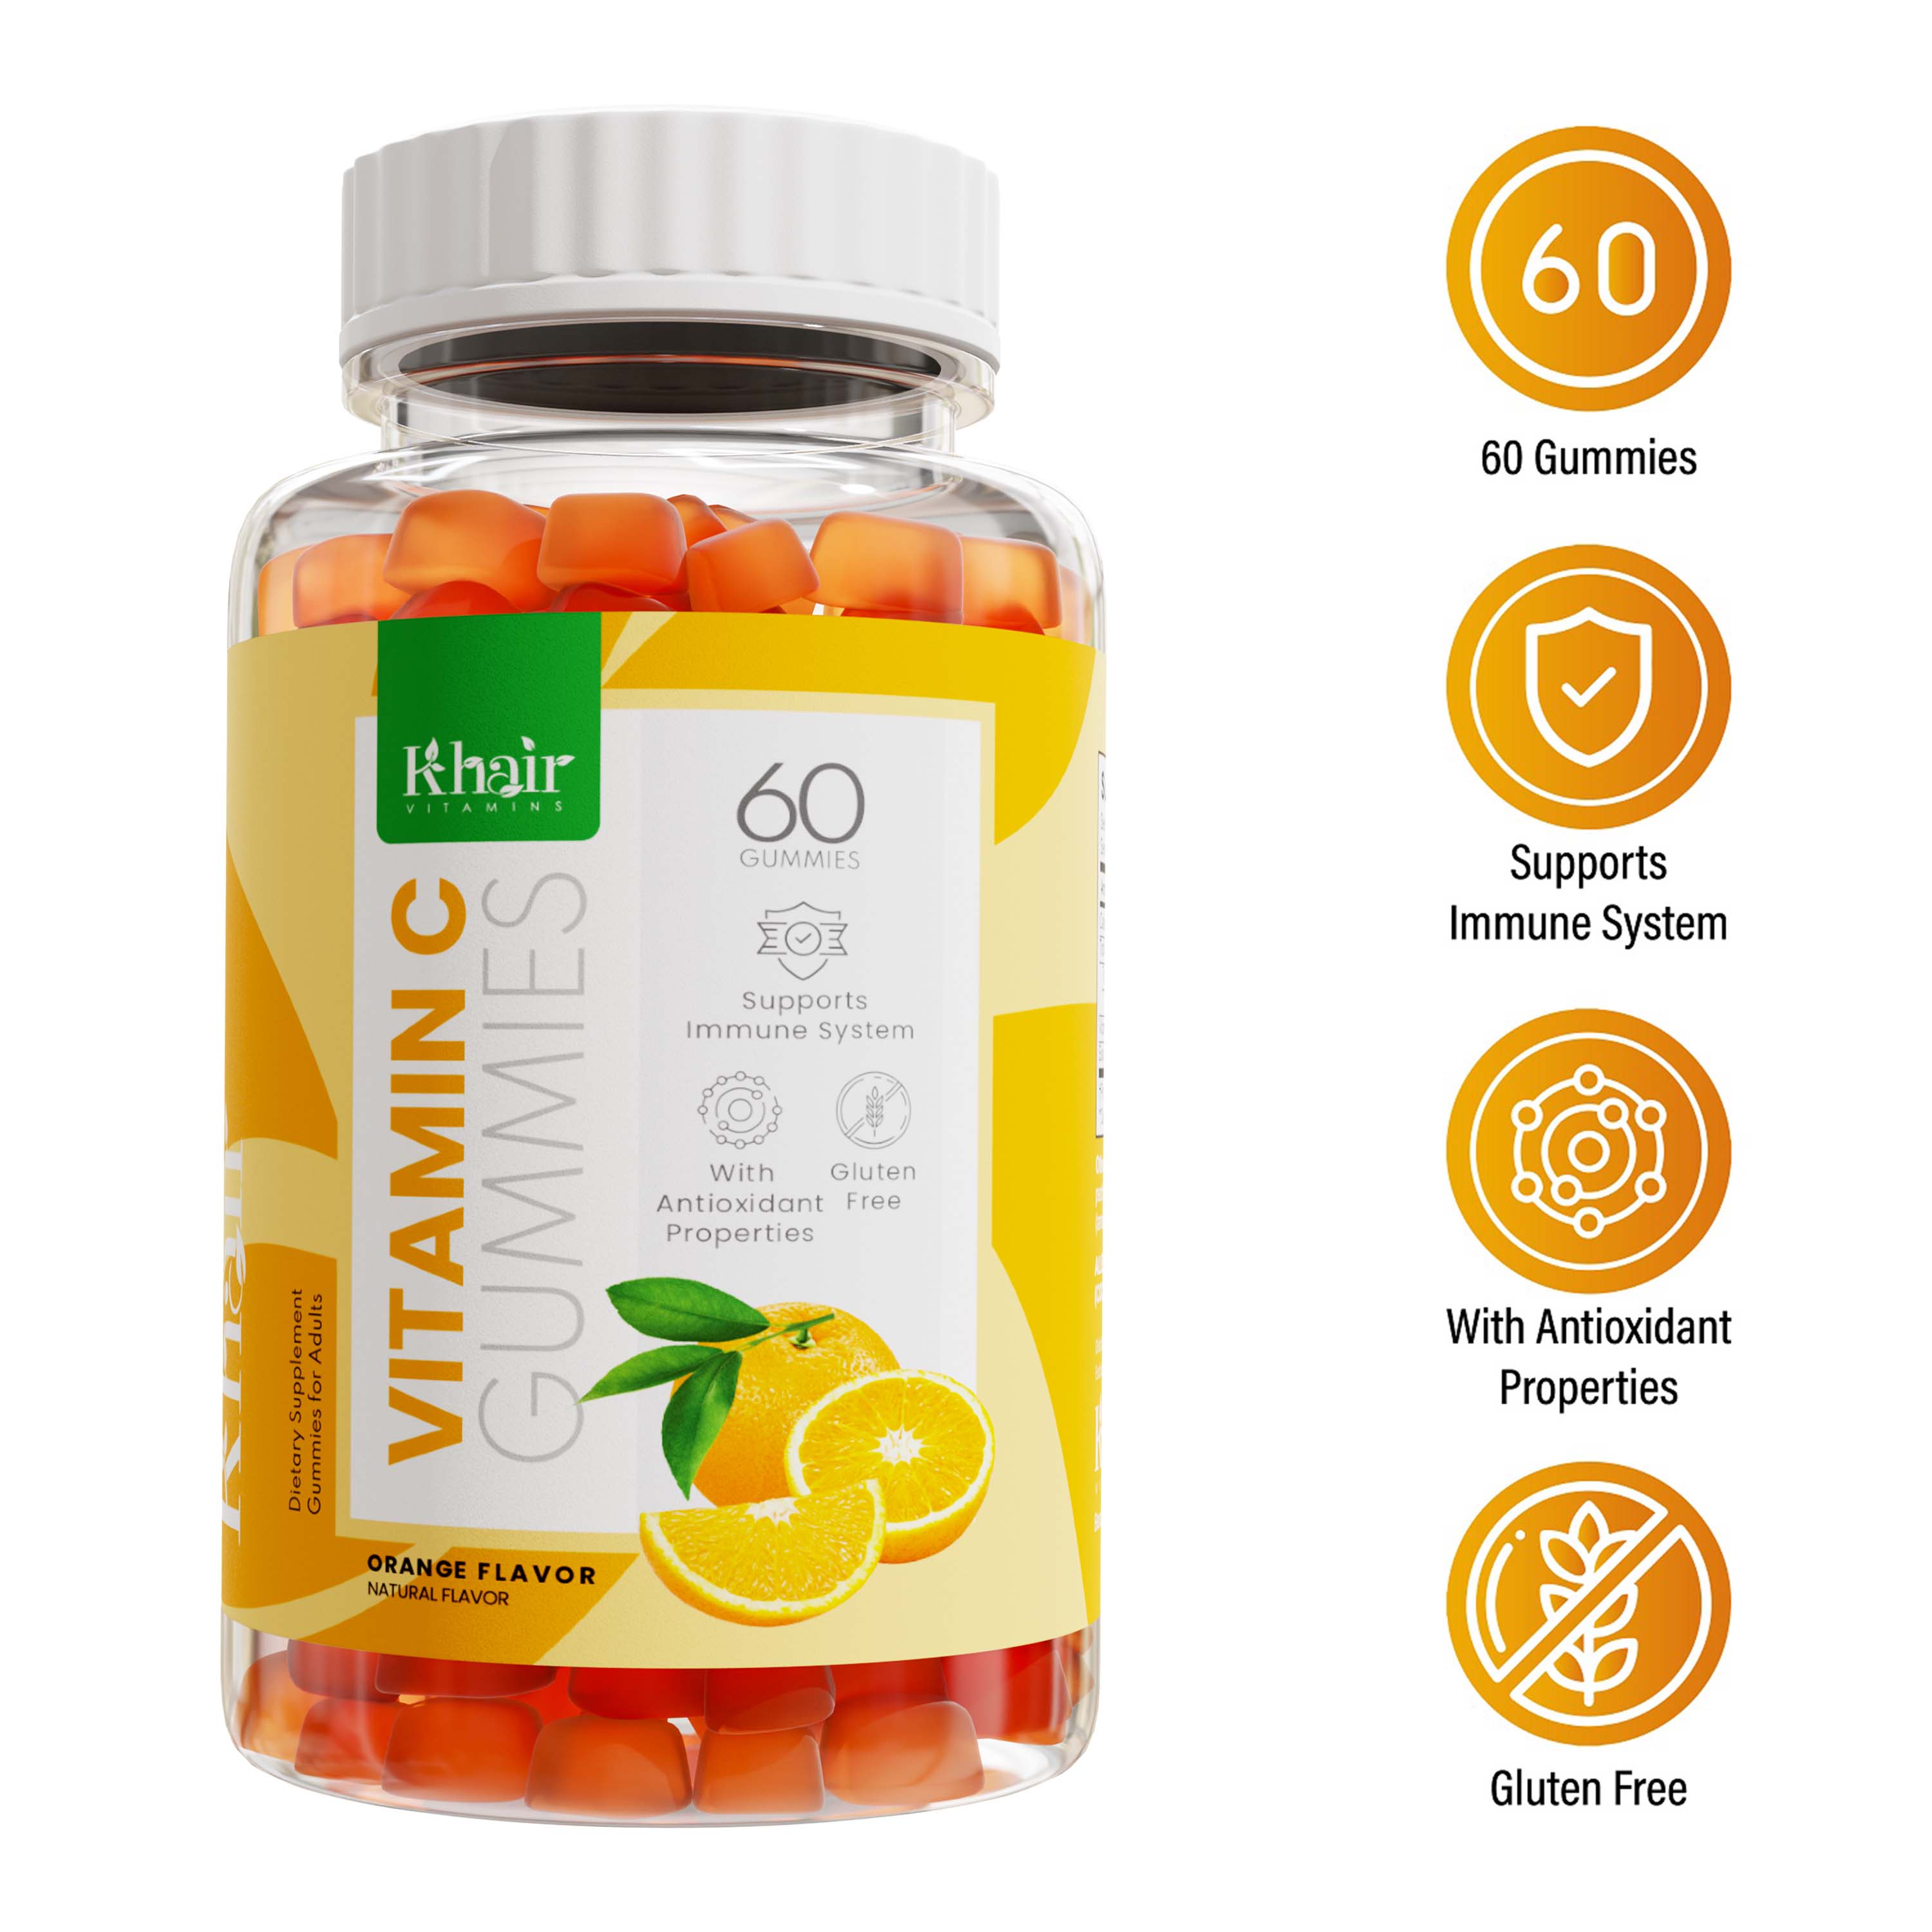 A bottle of Khair Vitamin C Gummies, with the label emphasizing 